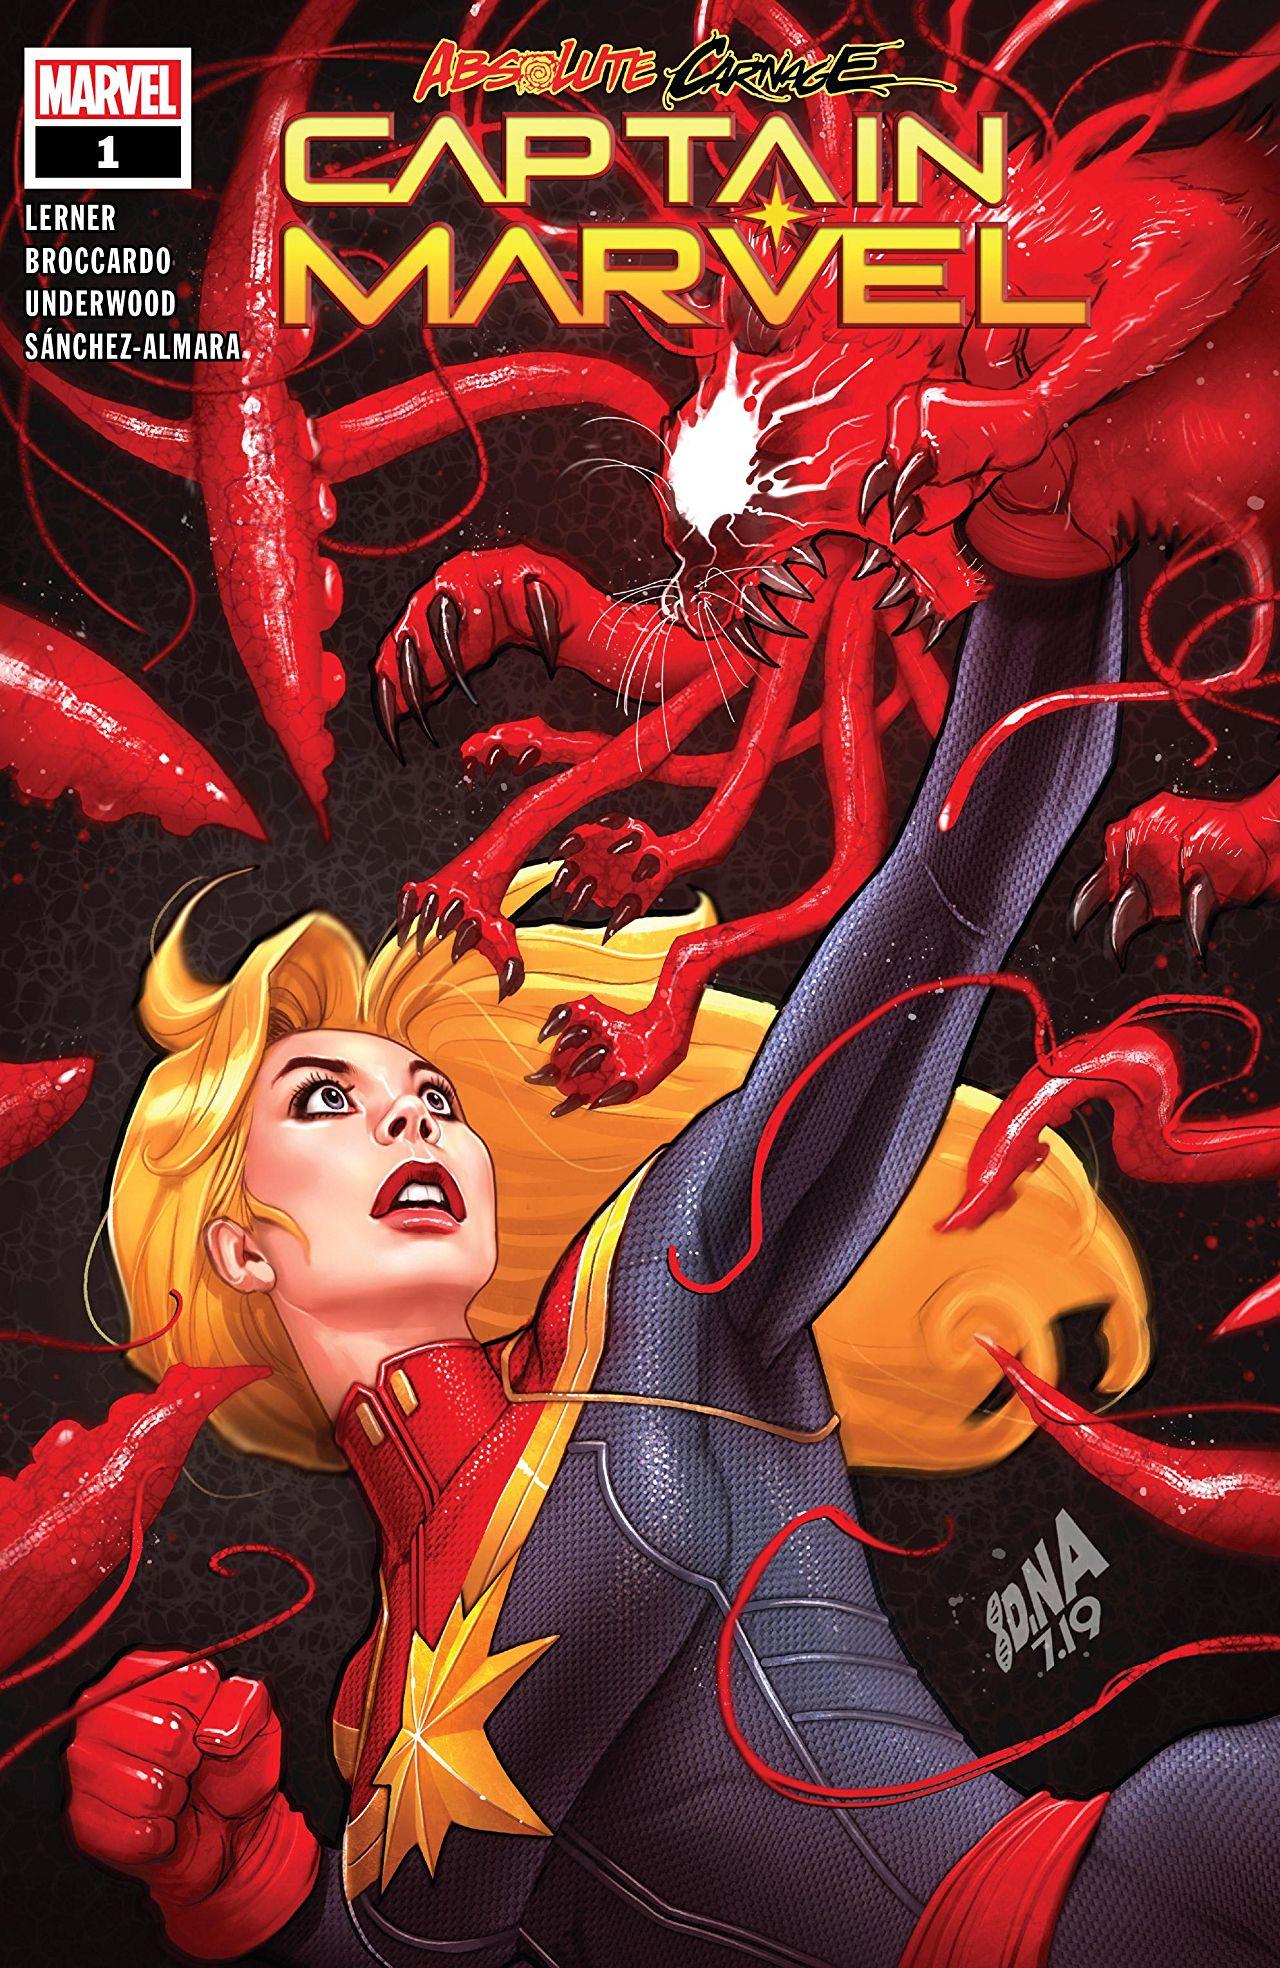 Absolute Carnage: Captain Marvel Vol. 1 #1